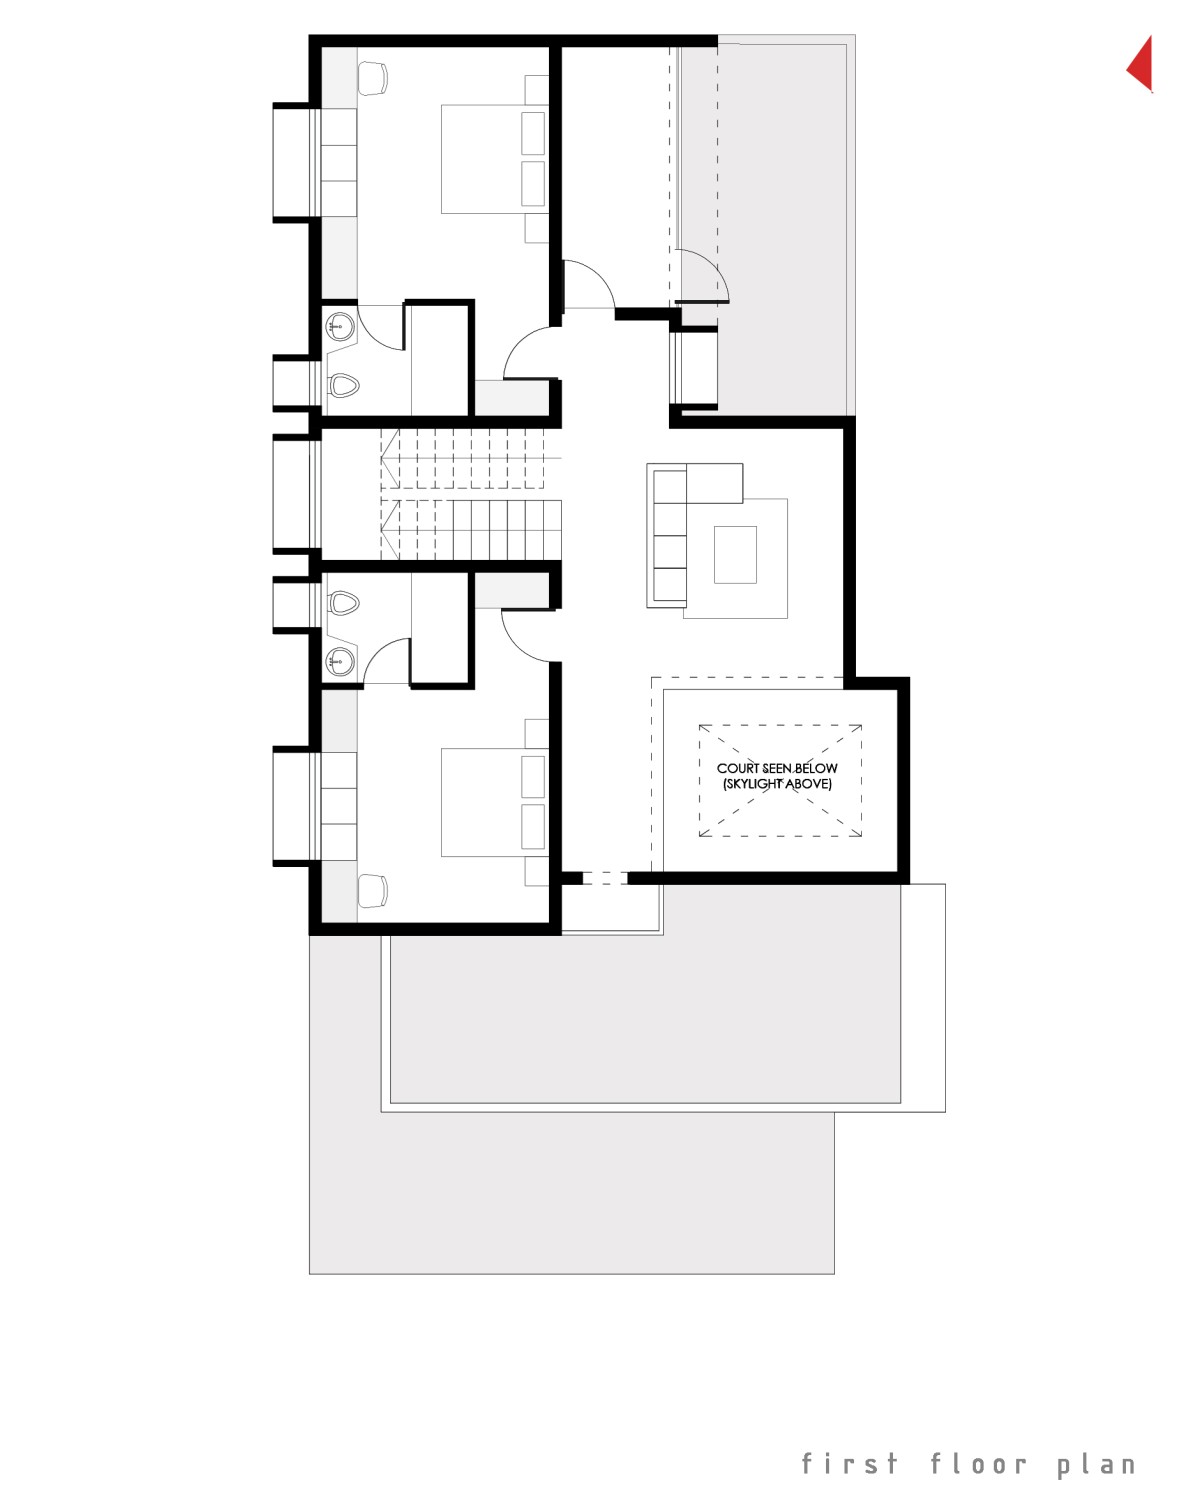 First floor plan of Amballoor Residence by N&RD